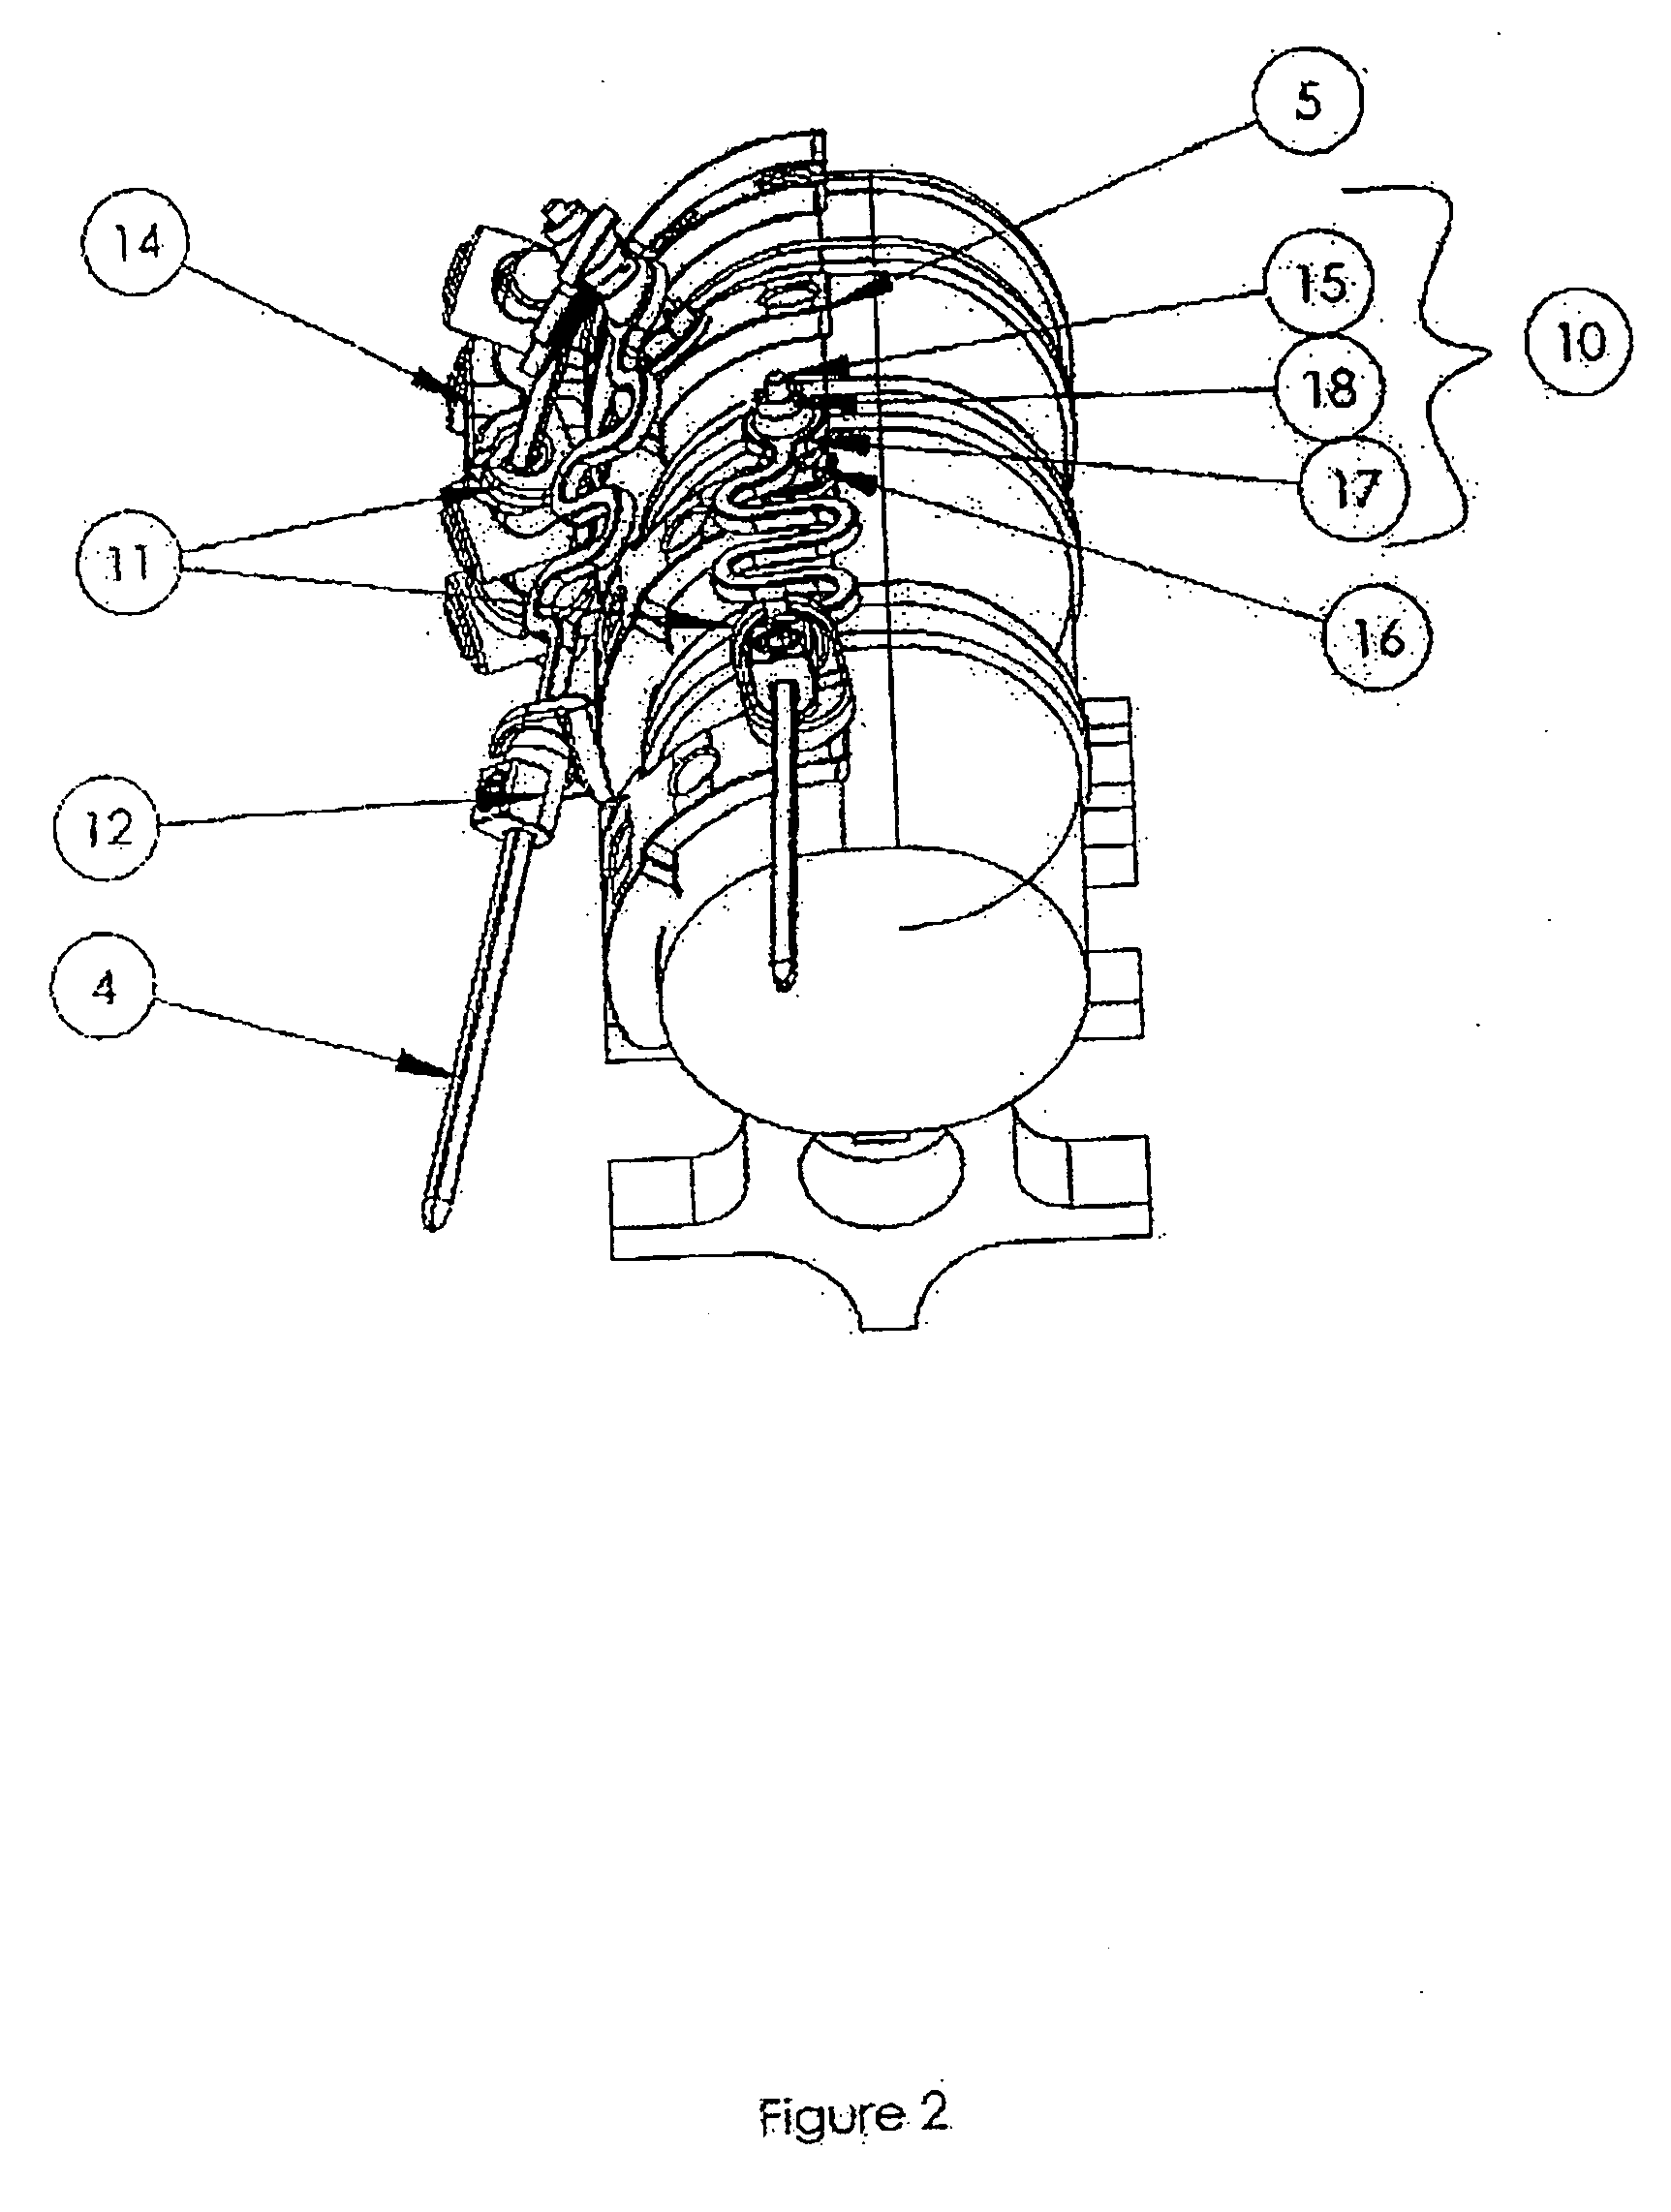 Orthopaedics device and system